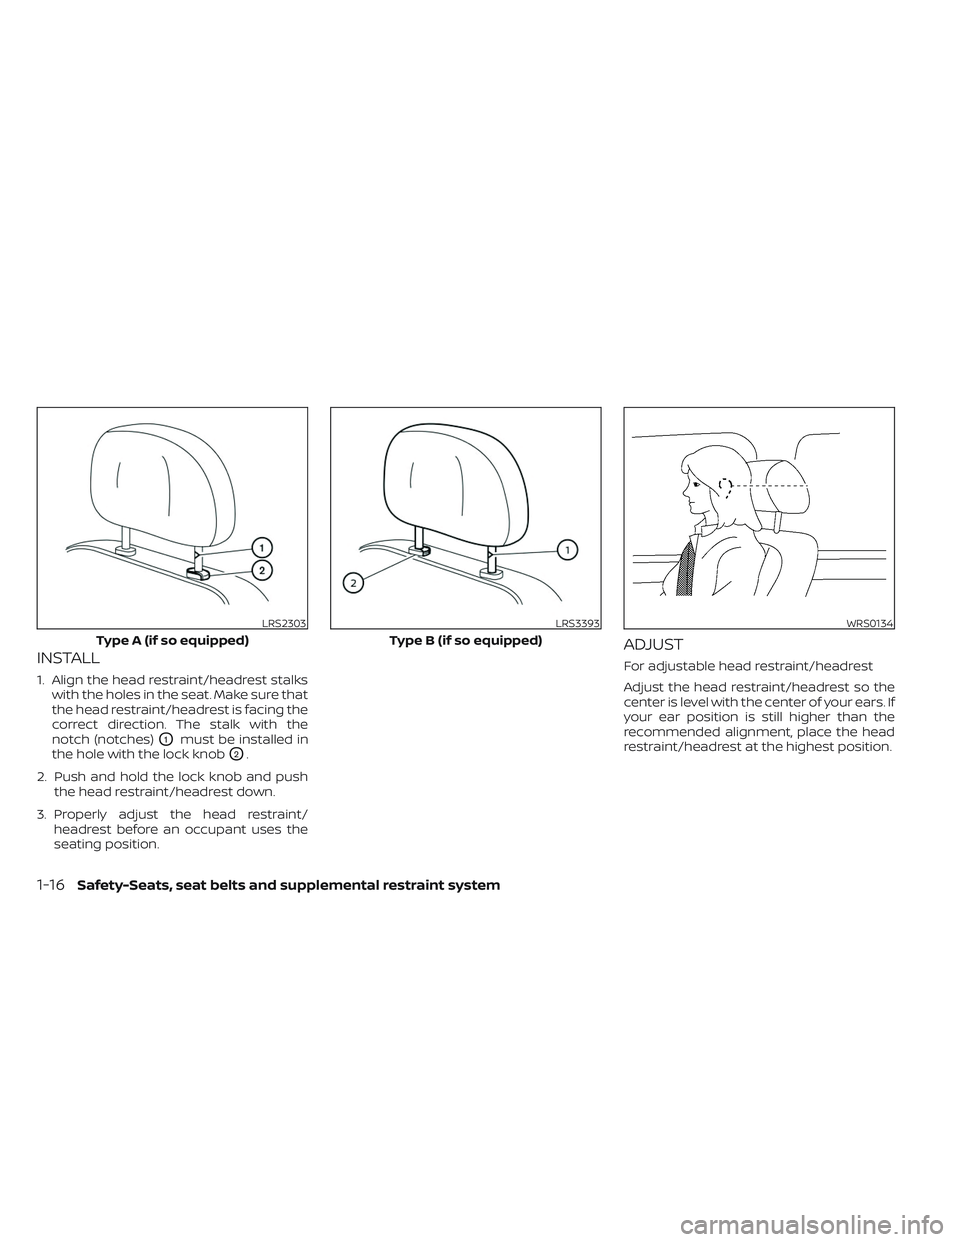 NISSAN PATHFINDER 2022  Owner´s Manual INSTALL
1. Align the head restraint/headrest stalkswith the holes in the seat. Make sure that
the head restraint/headrest is facing the
correct direction. The stalk with the
notch (notches)
O1must be 